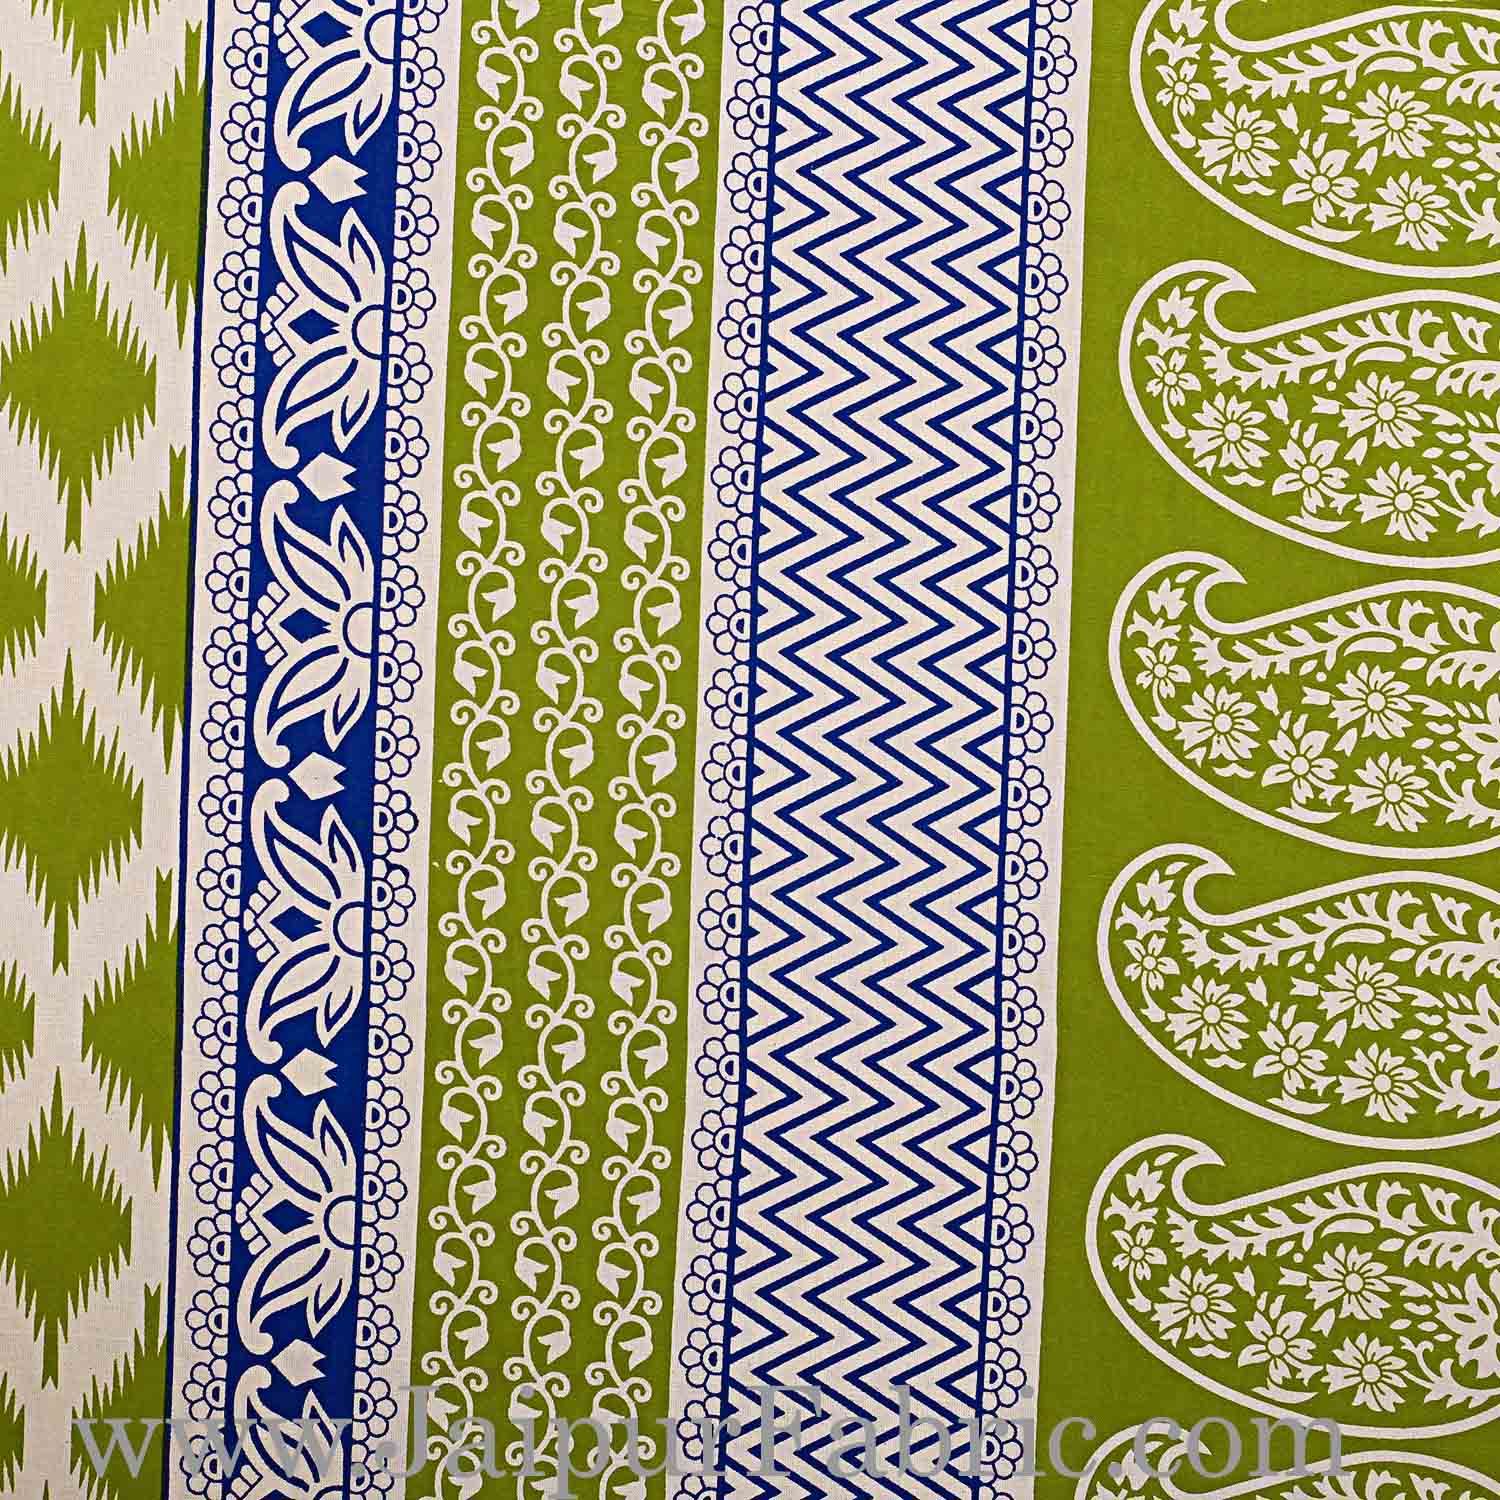 Double Bed Sheet  Green border With paisley Print Fine Cotton